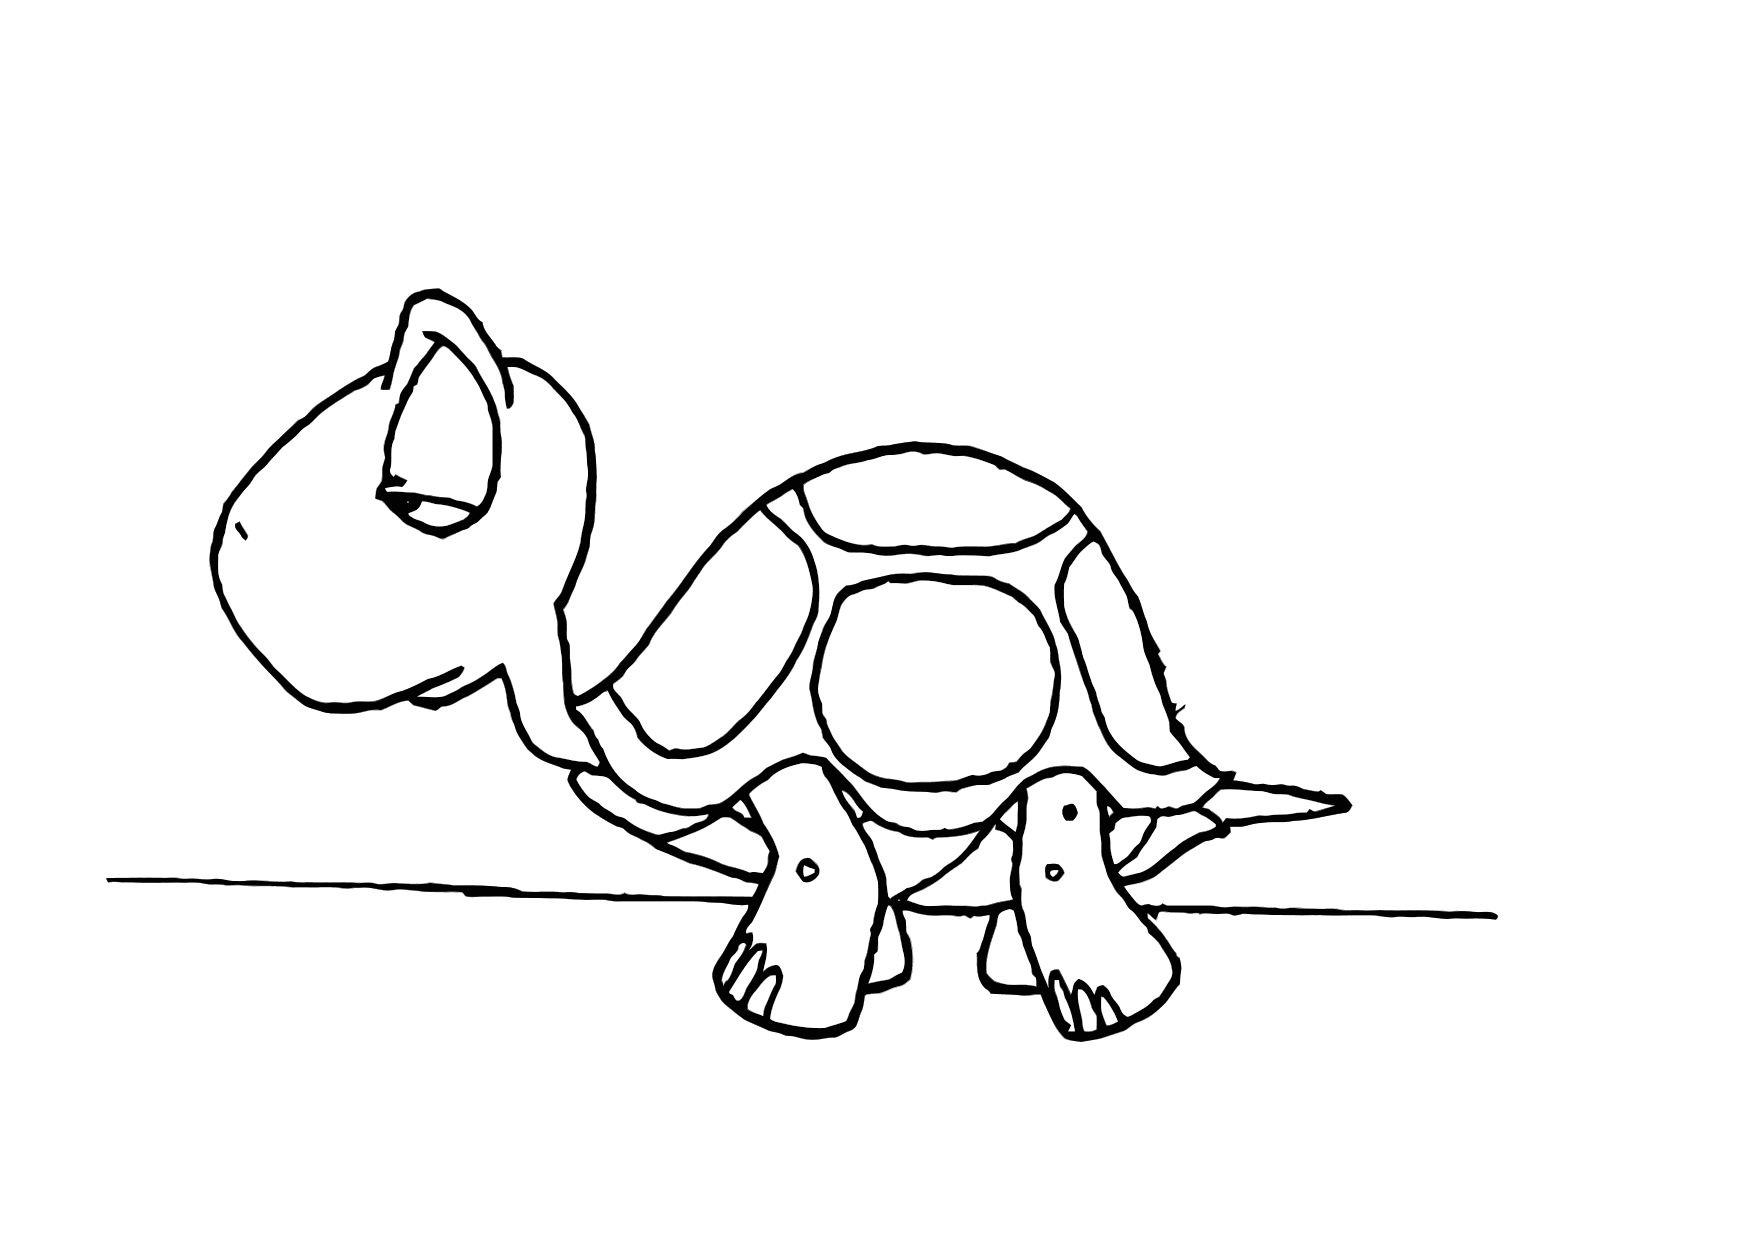 crush the turtle coloring page